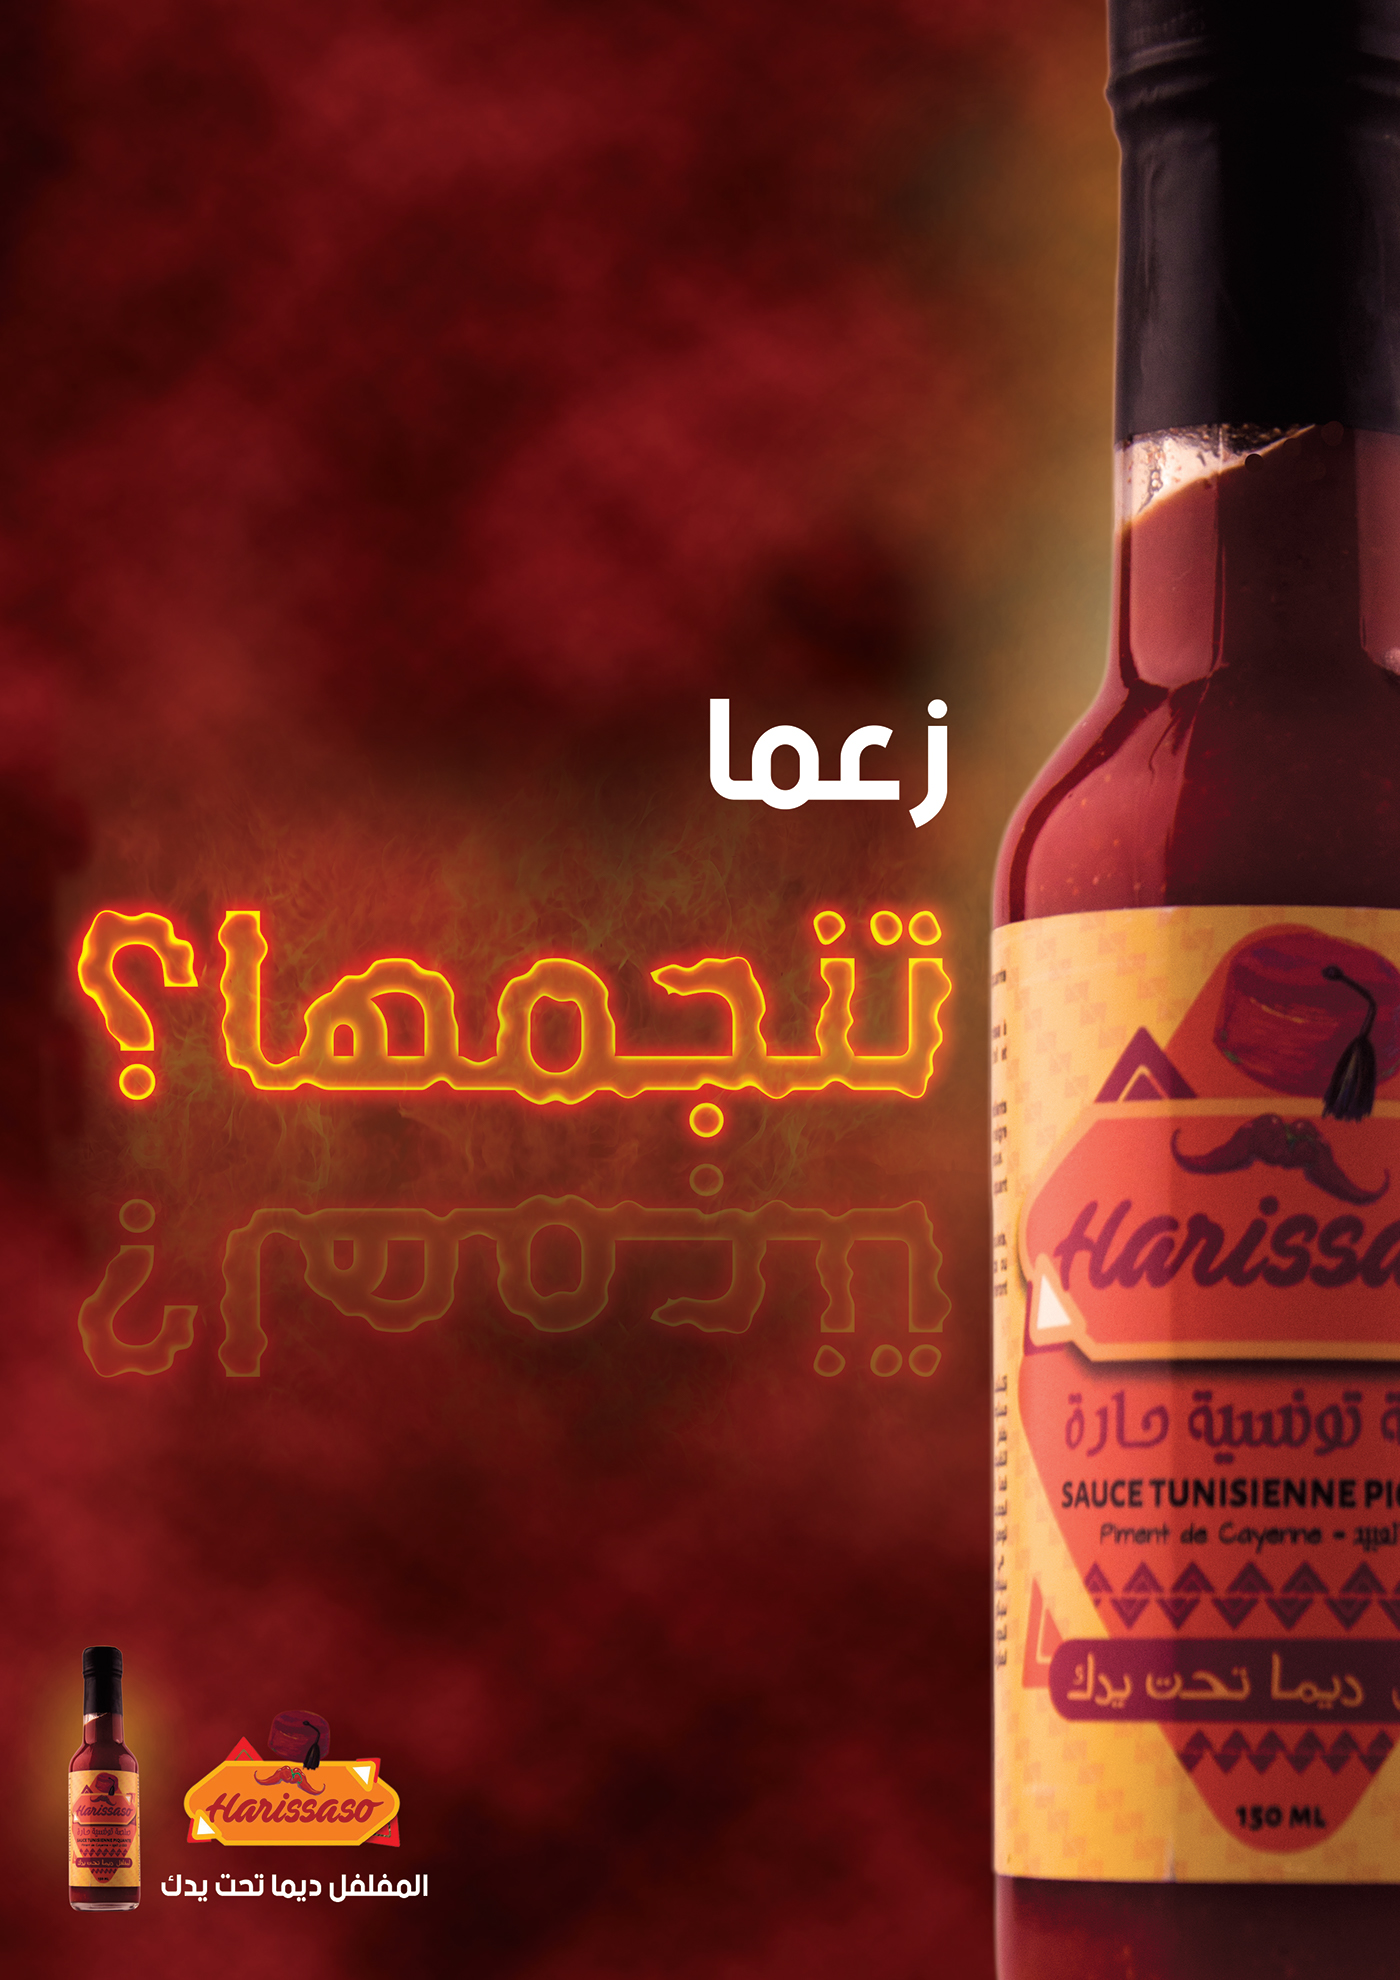 Hot sauce ad poster fire manipulation colors photoshop hotsauce Direct